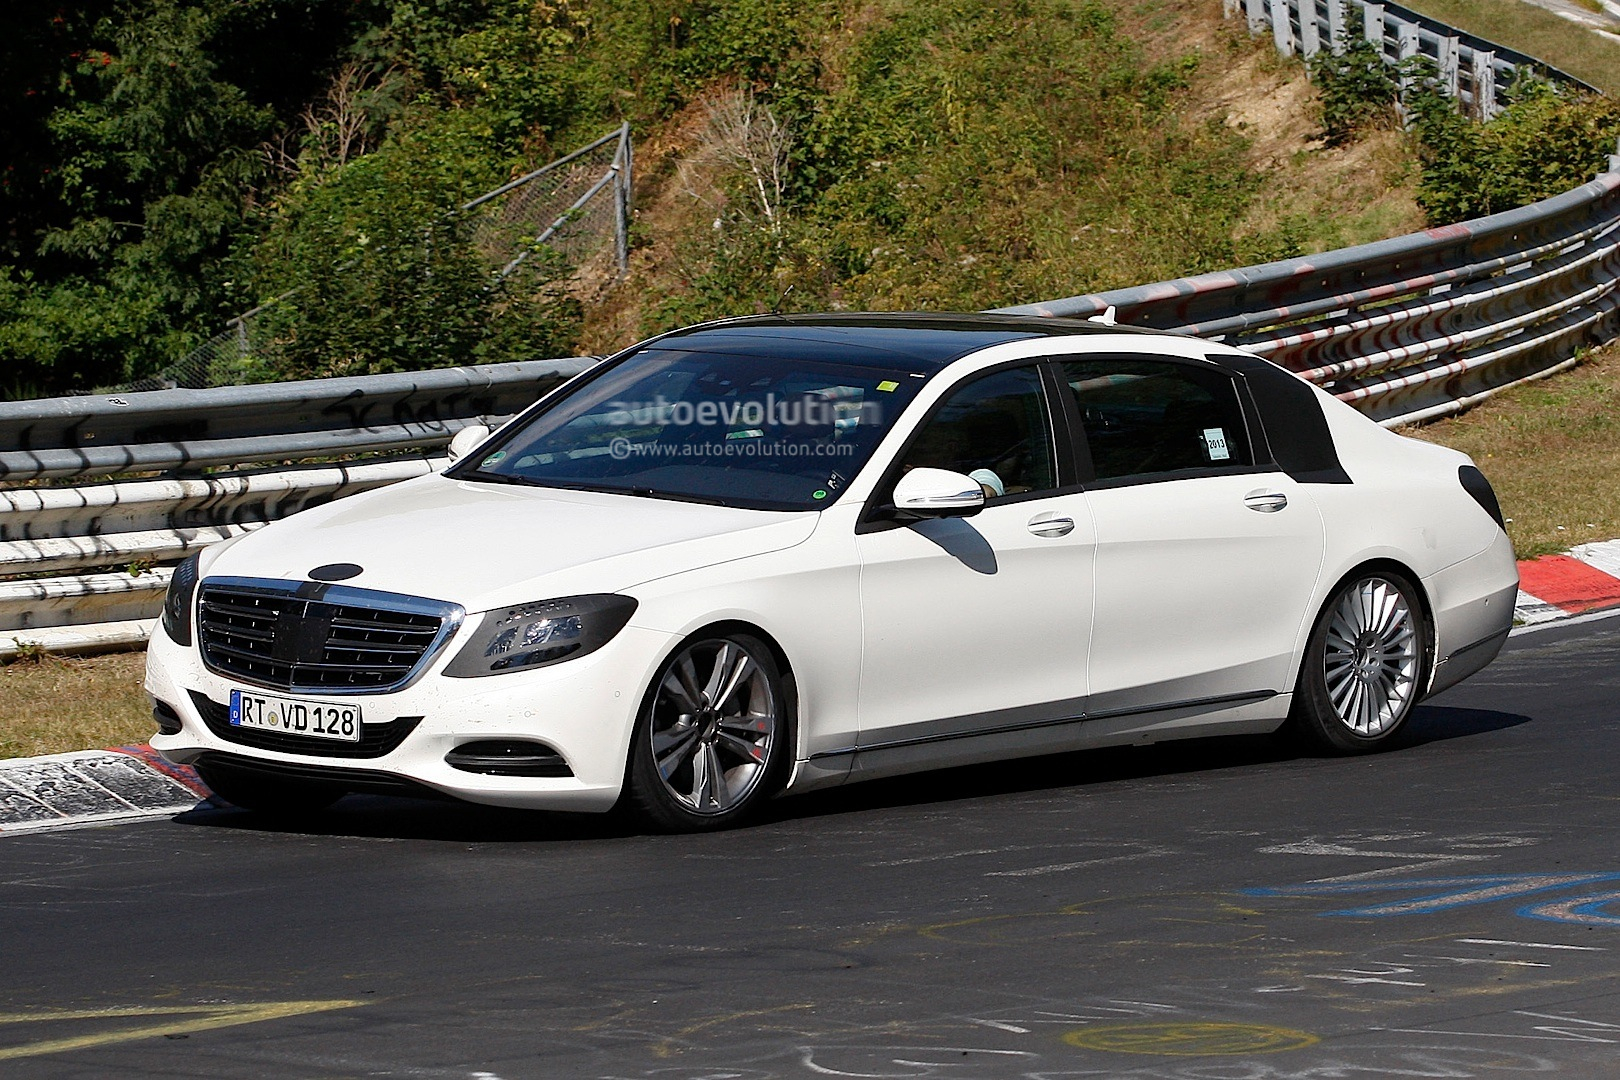 long-wheelbase-s-class-wafting-on-the-nurburgring-photo-gallery_2